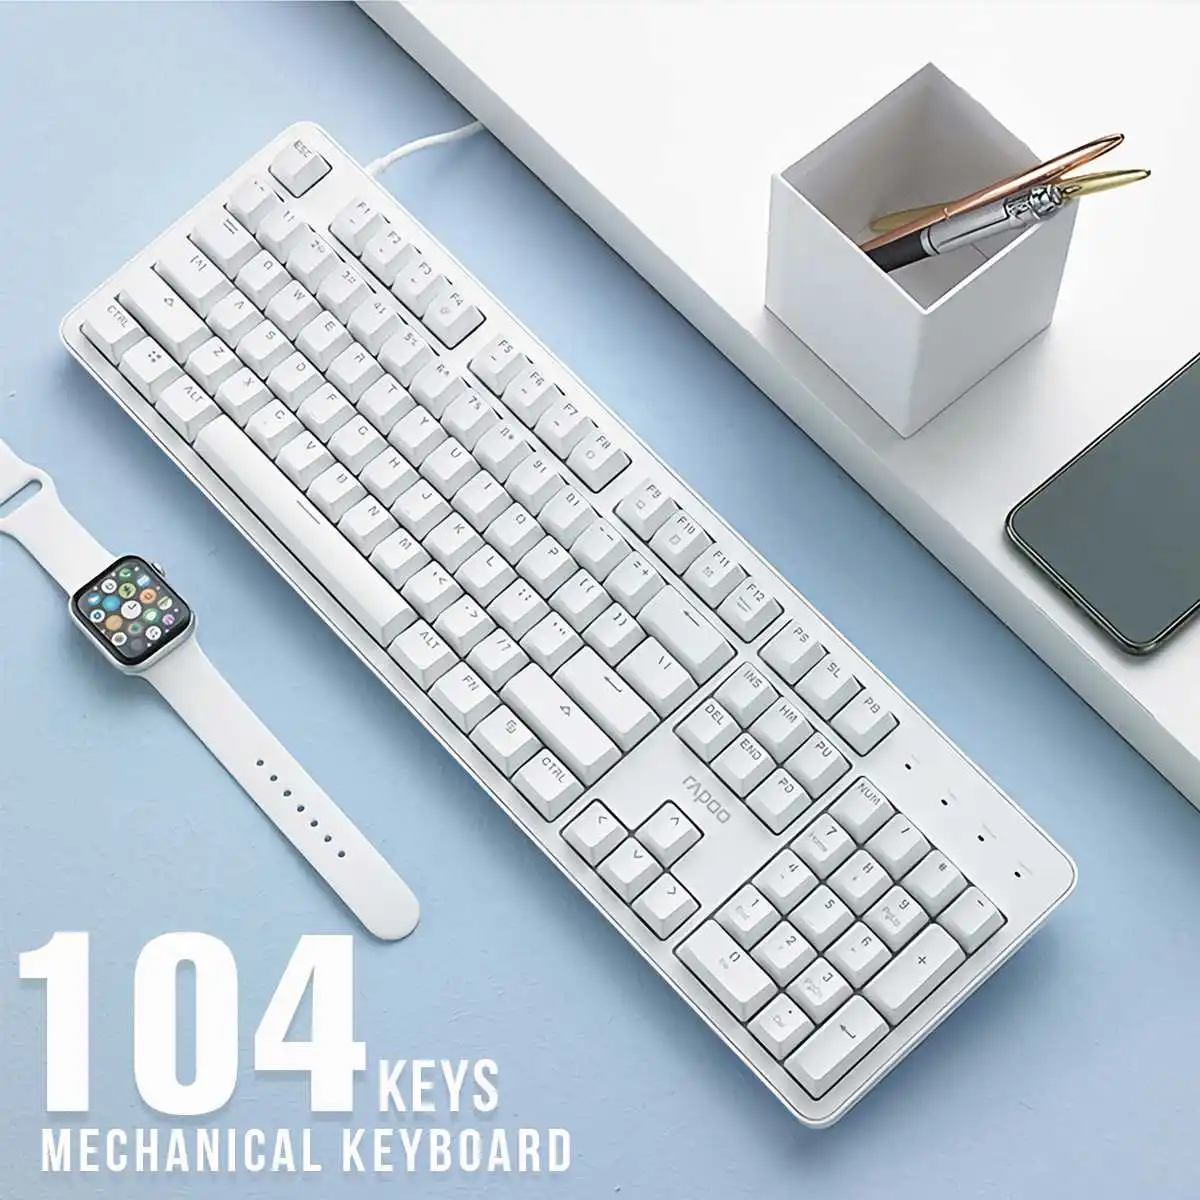 

MT710 104 Keys Office Mechanical Keyboard for Notebook Desktop Computer Special Typing 4 Colors Axis Wired Gaming Keyboard